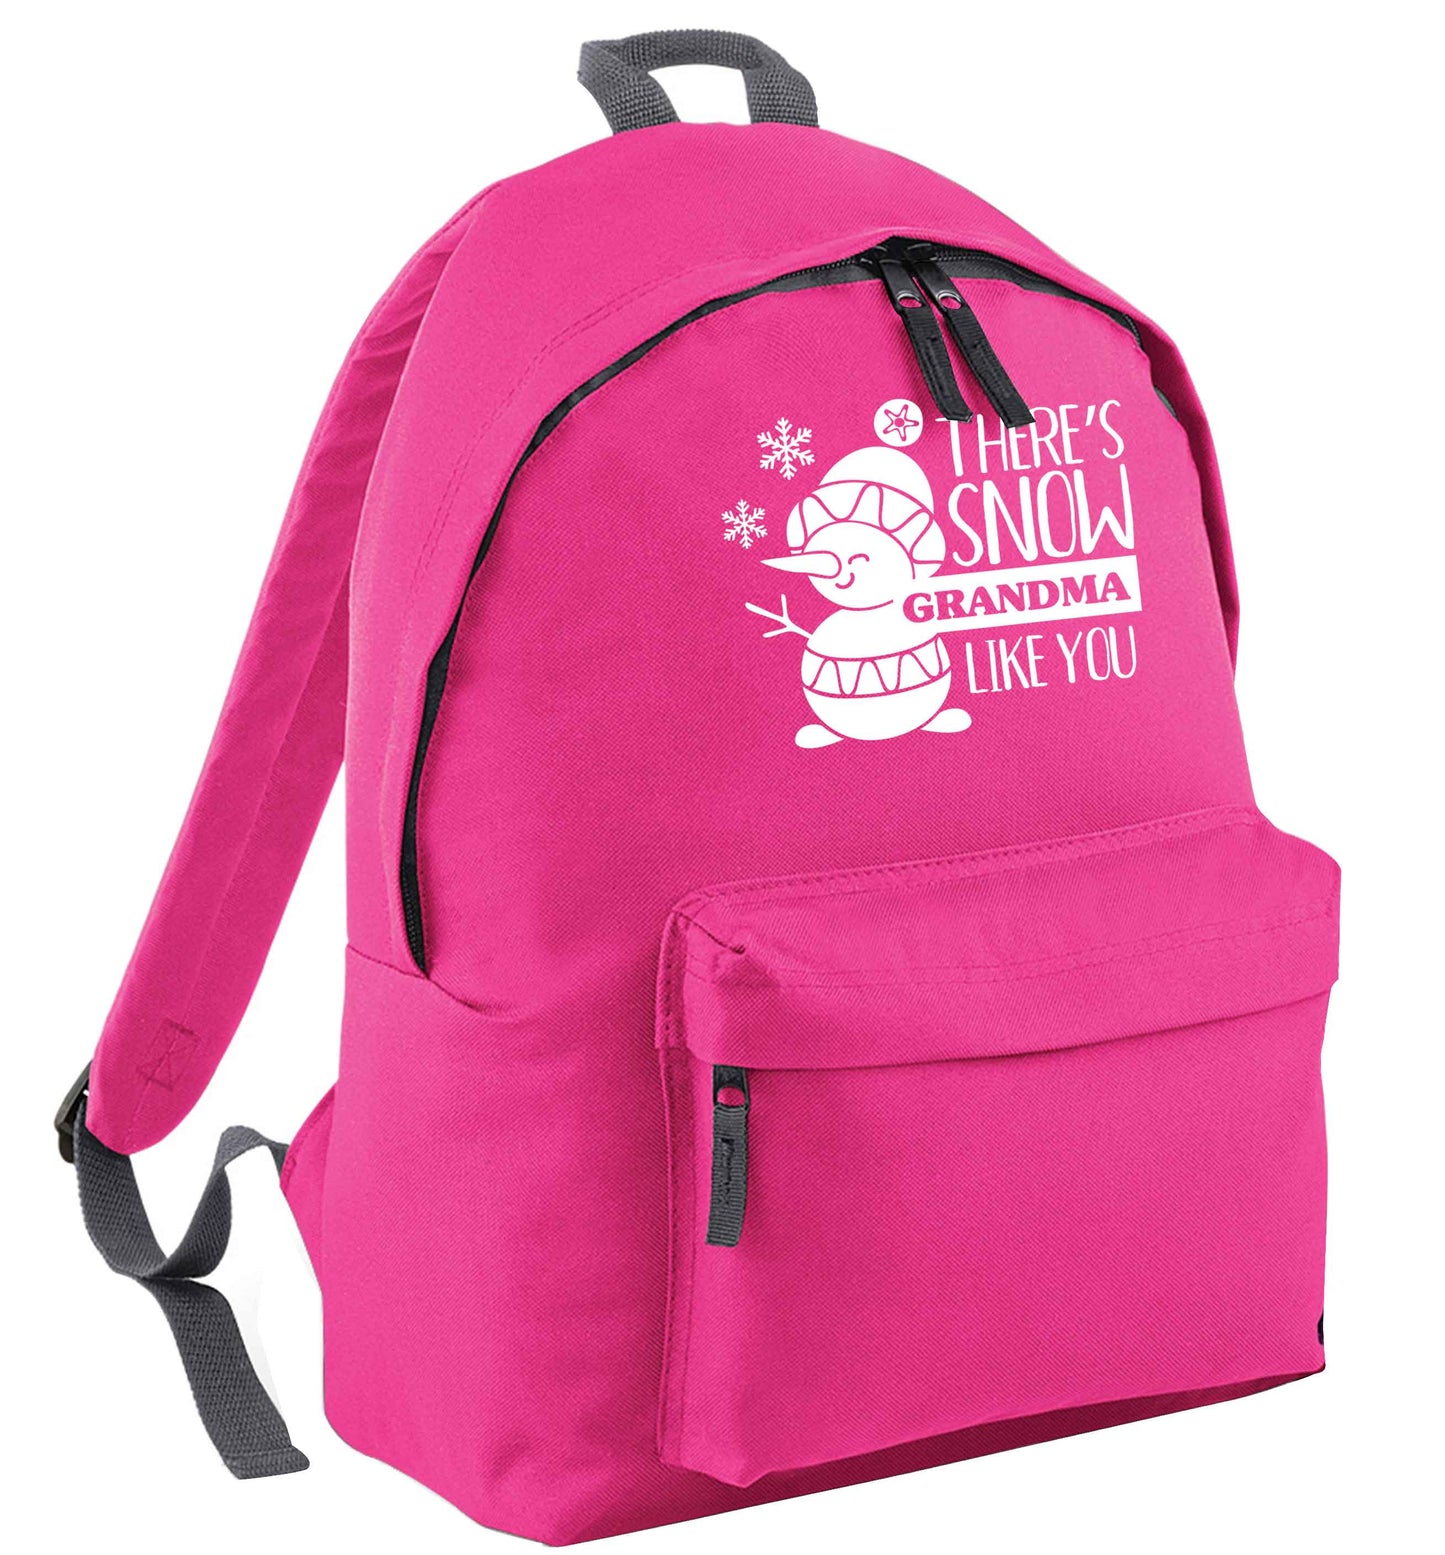 There's snow grandma like you pink adults backpack